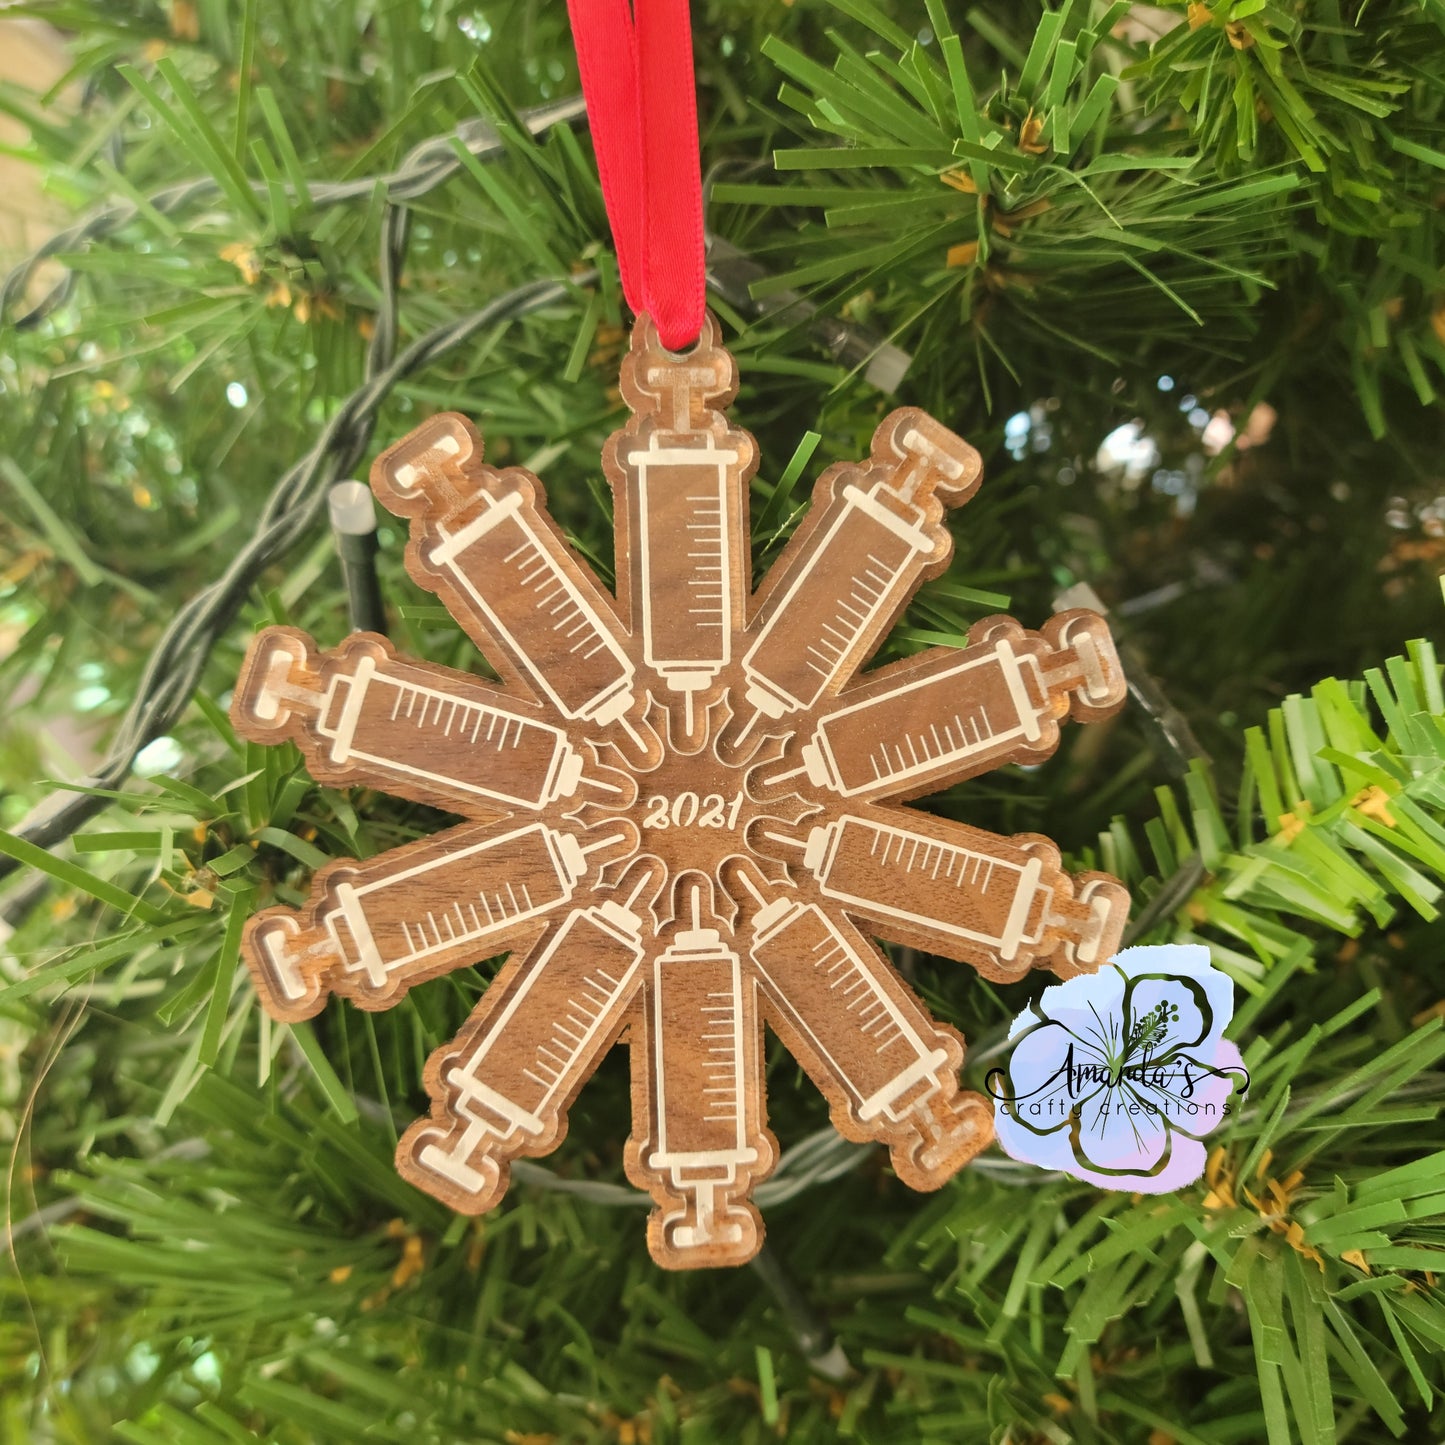 Get vaccinated 2021 Christmas ornament with vaccine needles